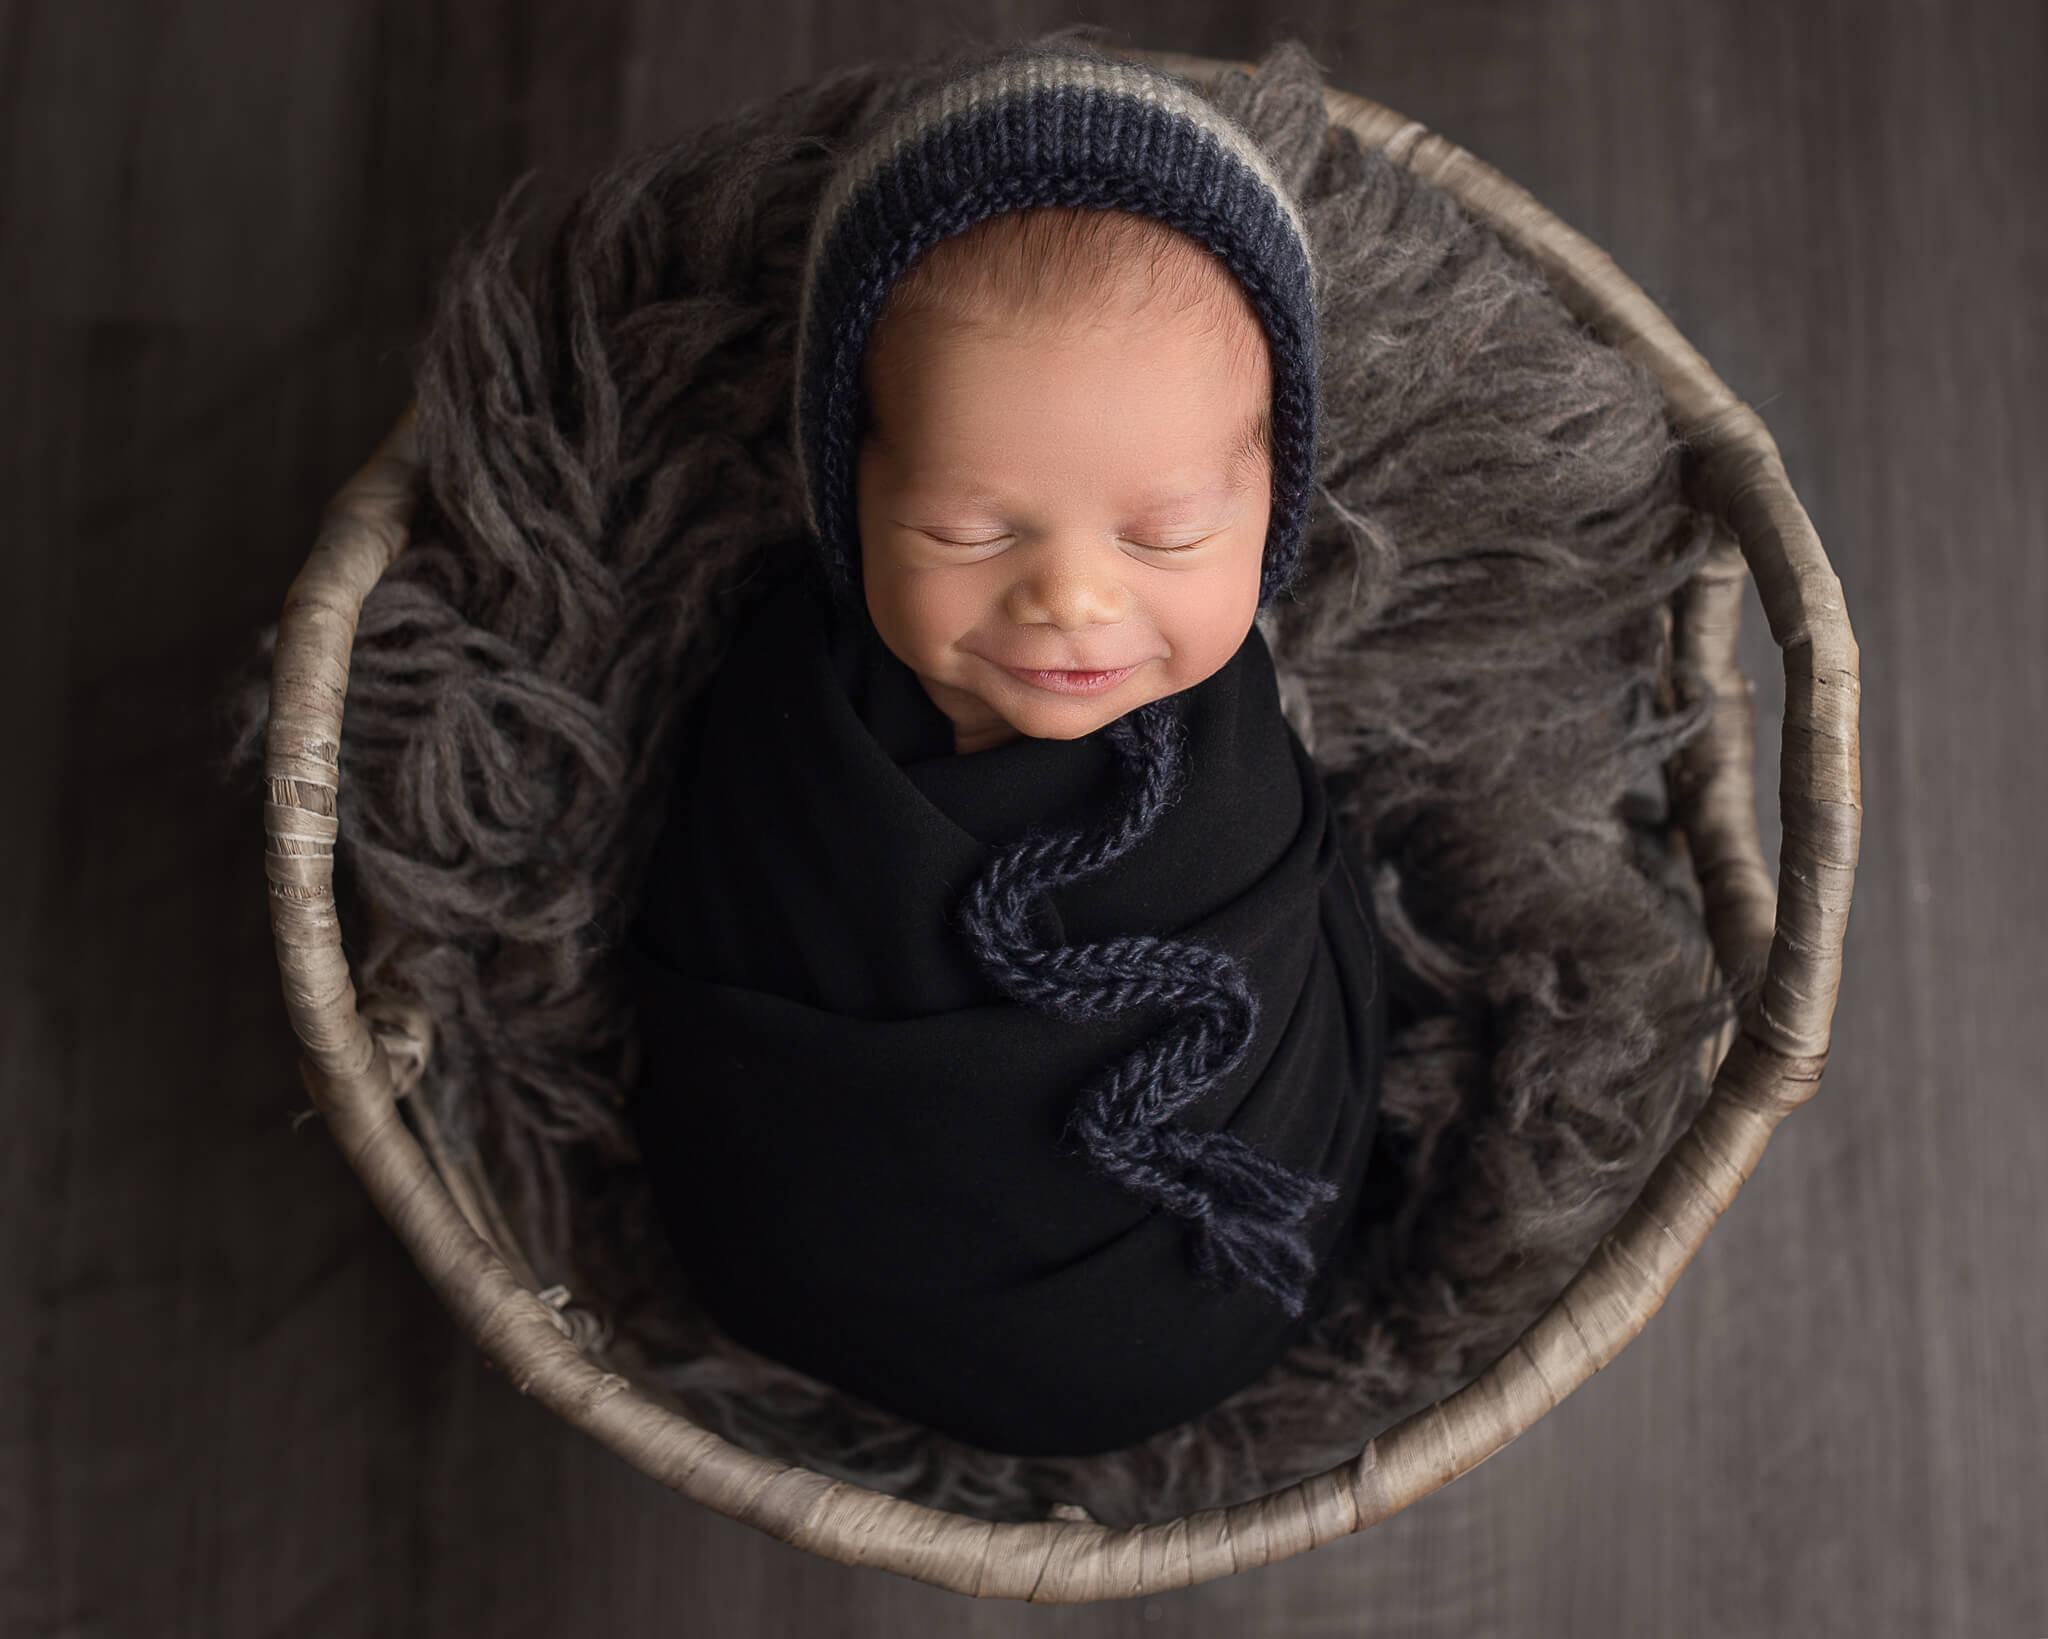 infant and newborn massage in blog photo of newborn wrapped in navy blanket in basket